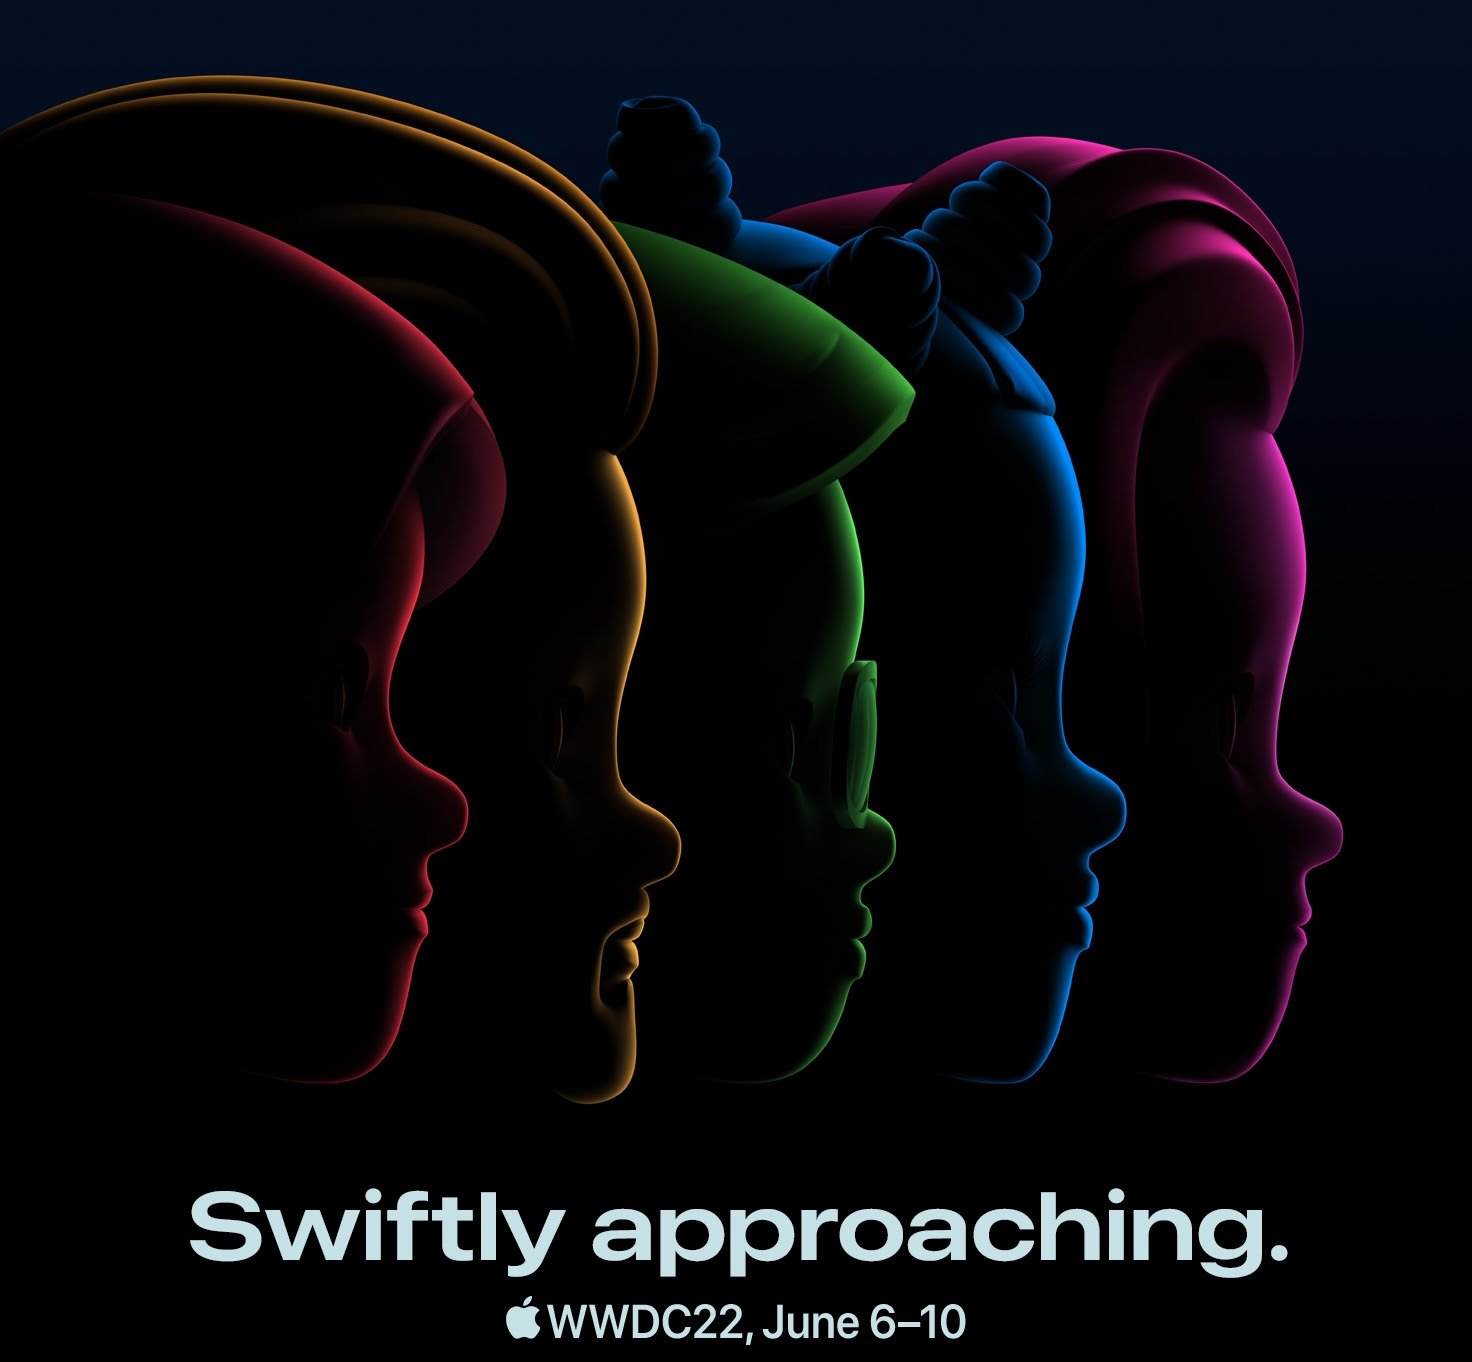 Apple WWDC 2022 invite: Memojis depicted in profile with text